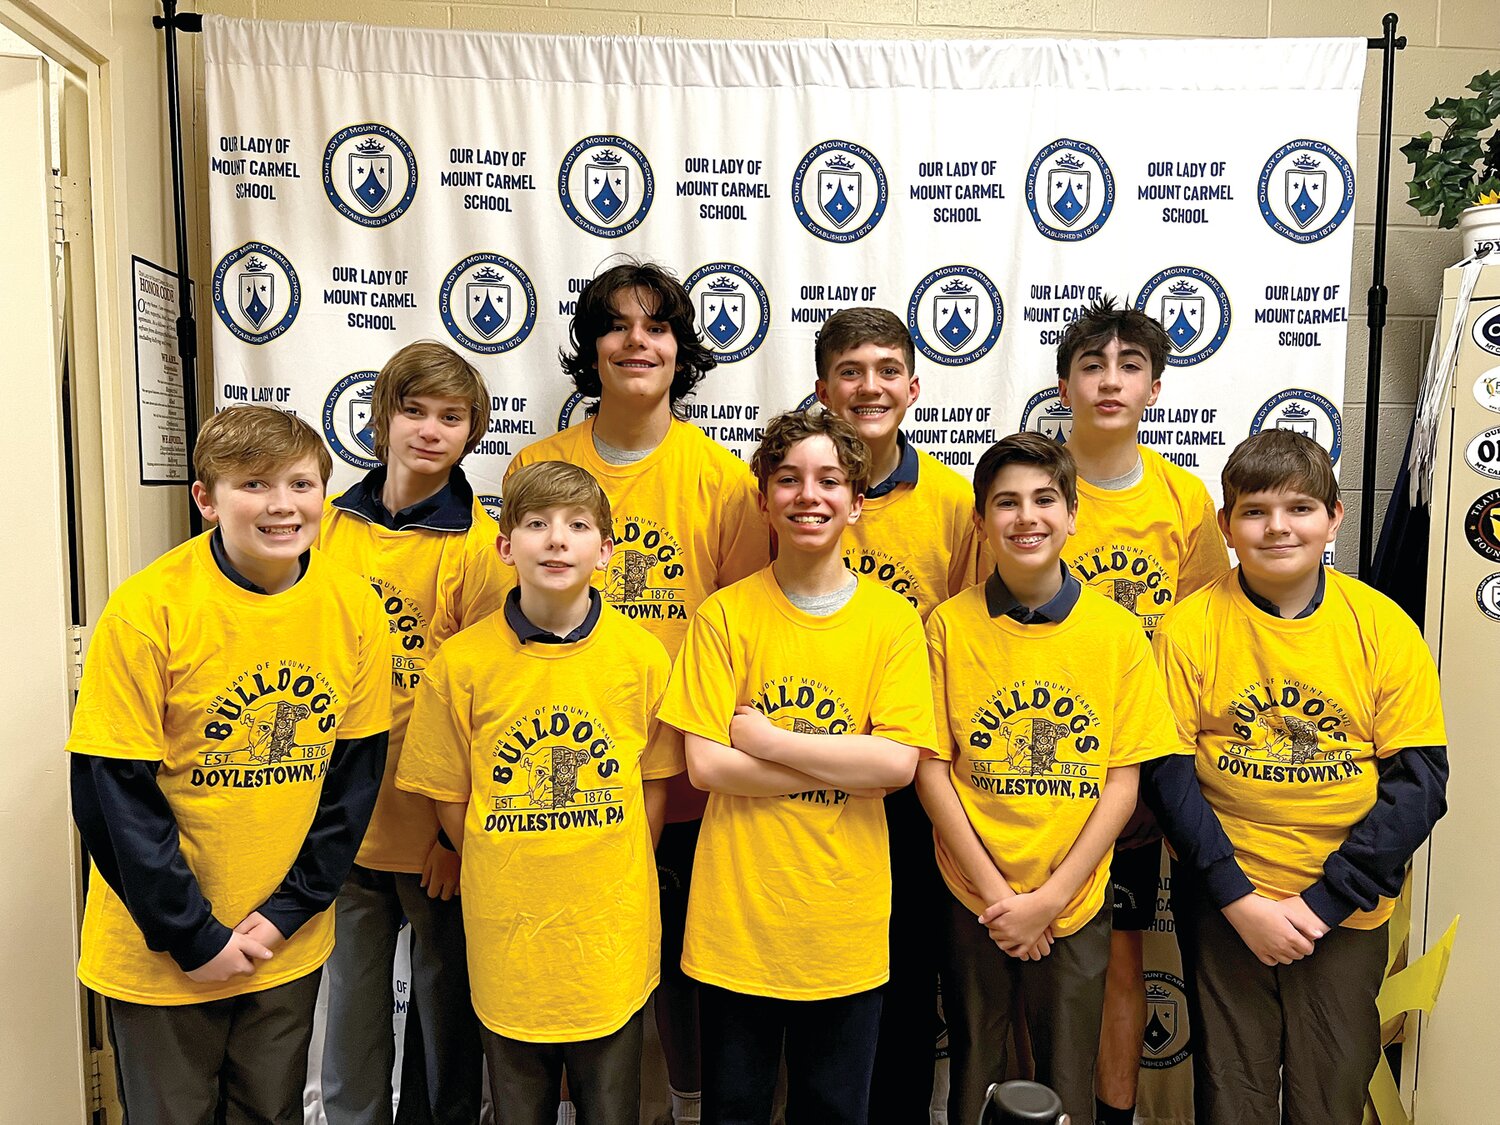 The Bionic Bulldogs will represent Our Lady of Mount Carmel School in the 2023-24 First Lego League Pennsylvania State Championships.